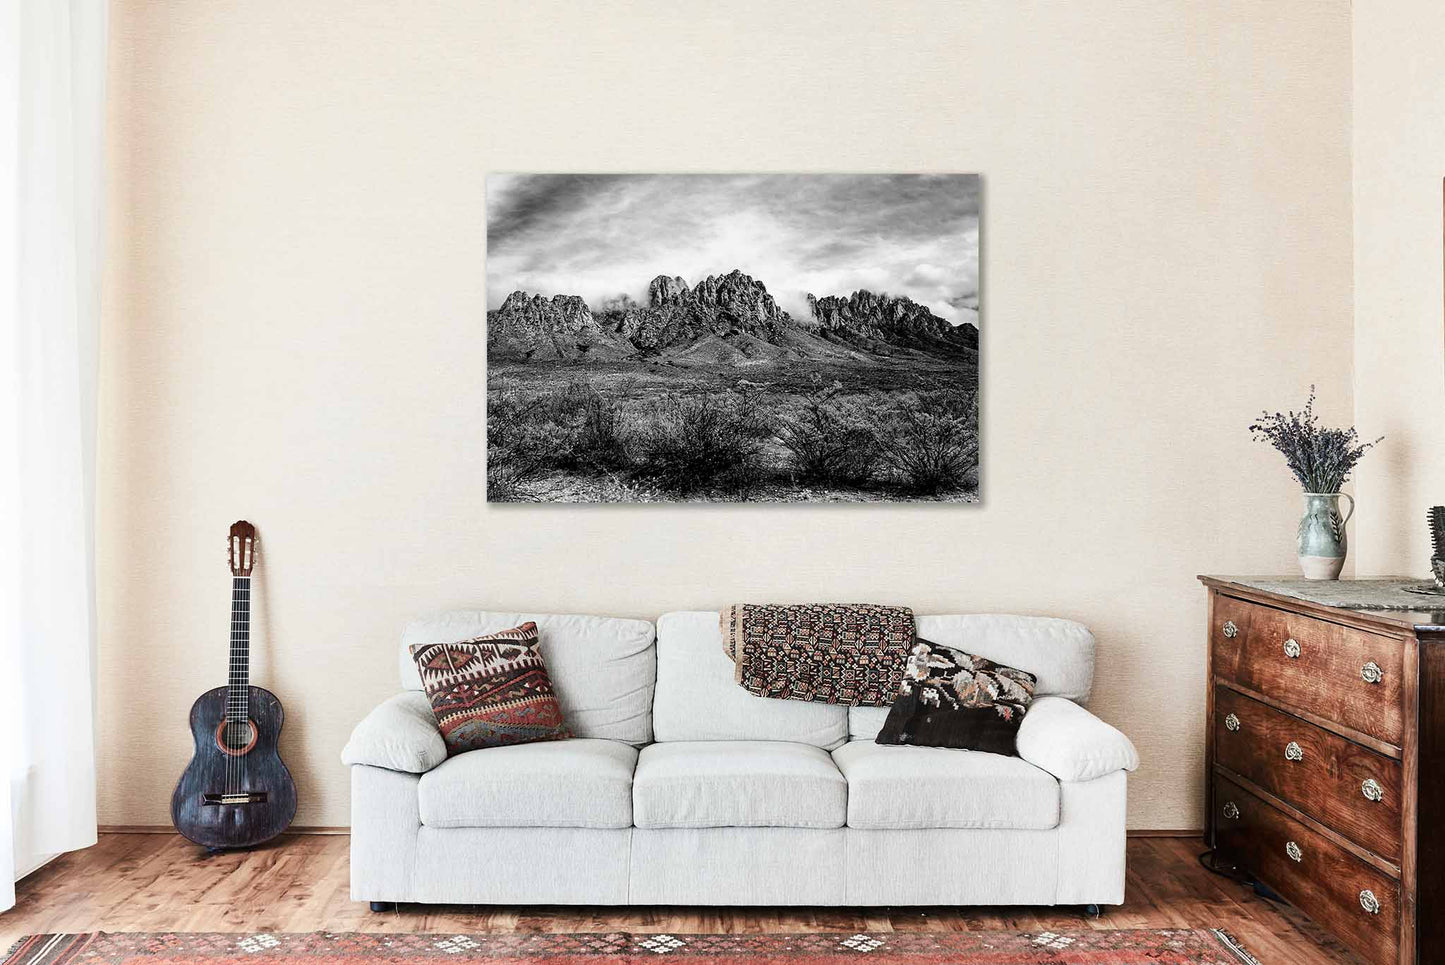 Black and White Canvas Wall Art (Ready to Hang) Gallery Wrap of Organ Mountains near Las Cruces New Mexico Chihuahuan Desert Photography Southwest Decor